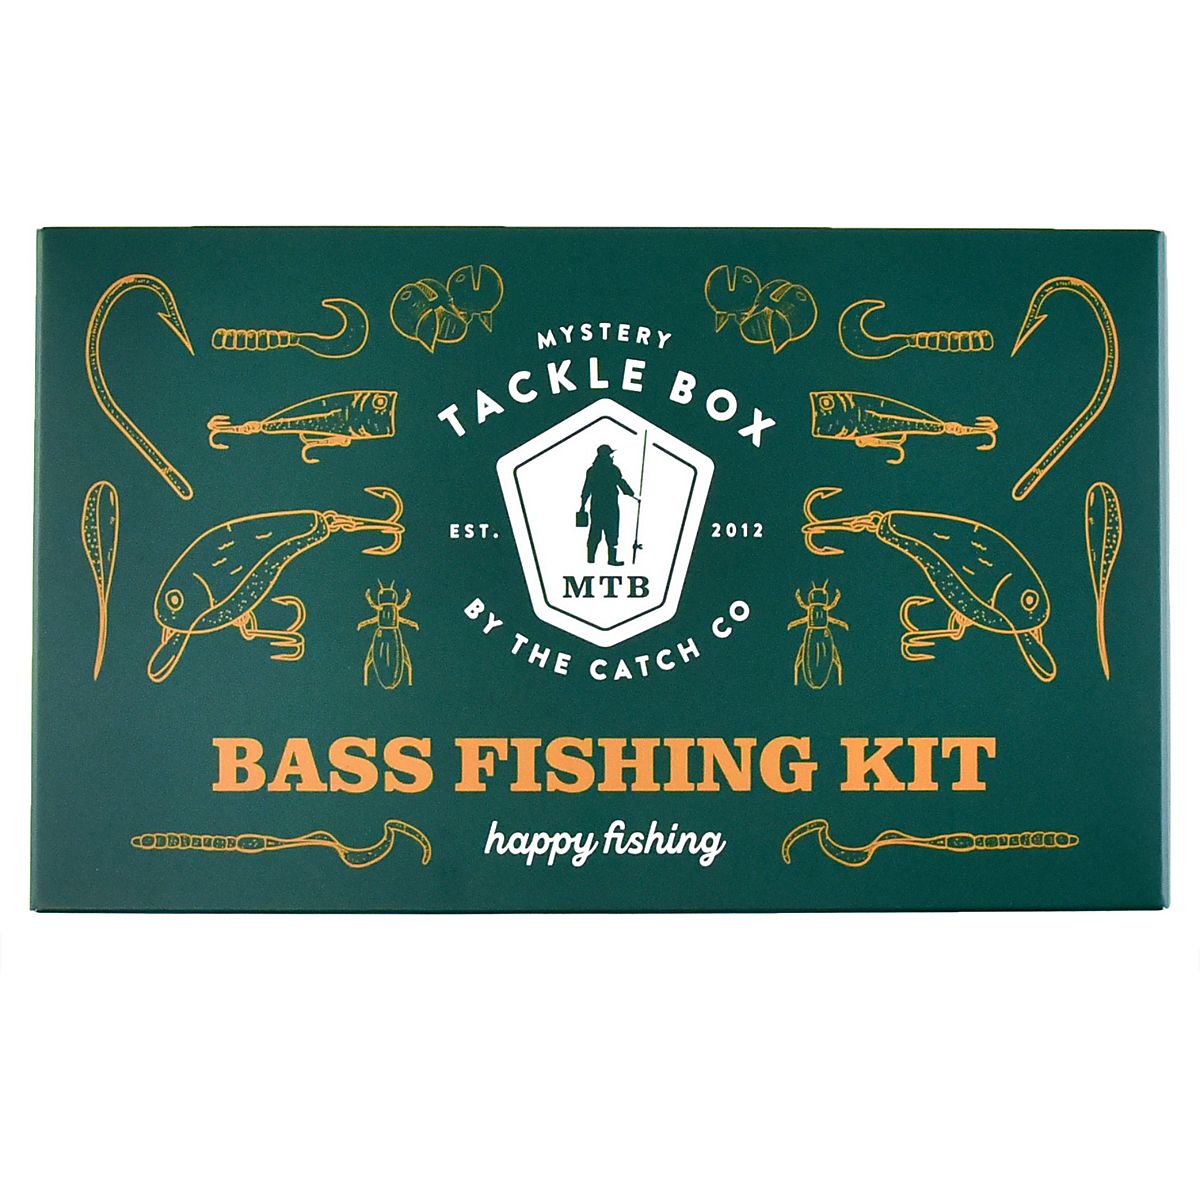 Sports and Recreation Photos- Tacklebox and fishing lures